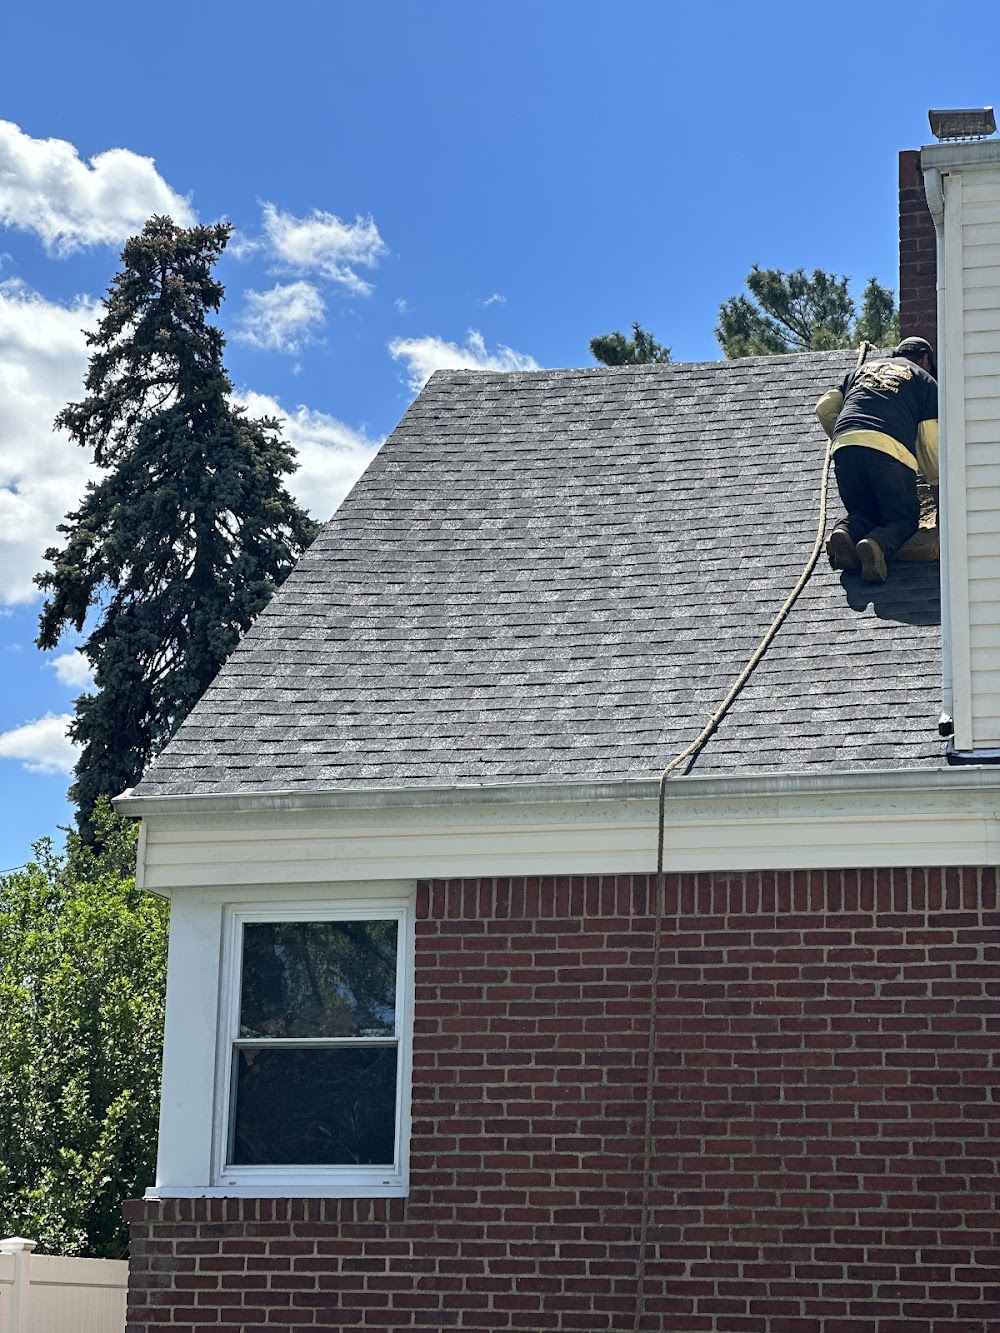 Clearview Roofing & Construction Rockville Centre